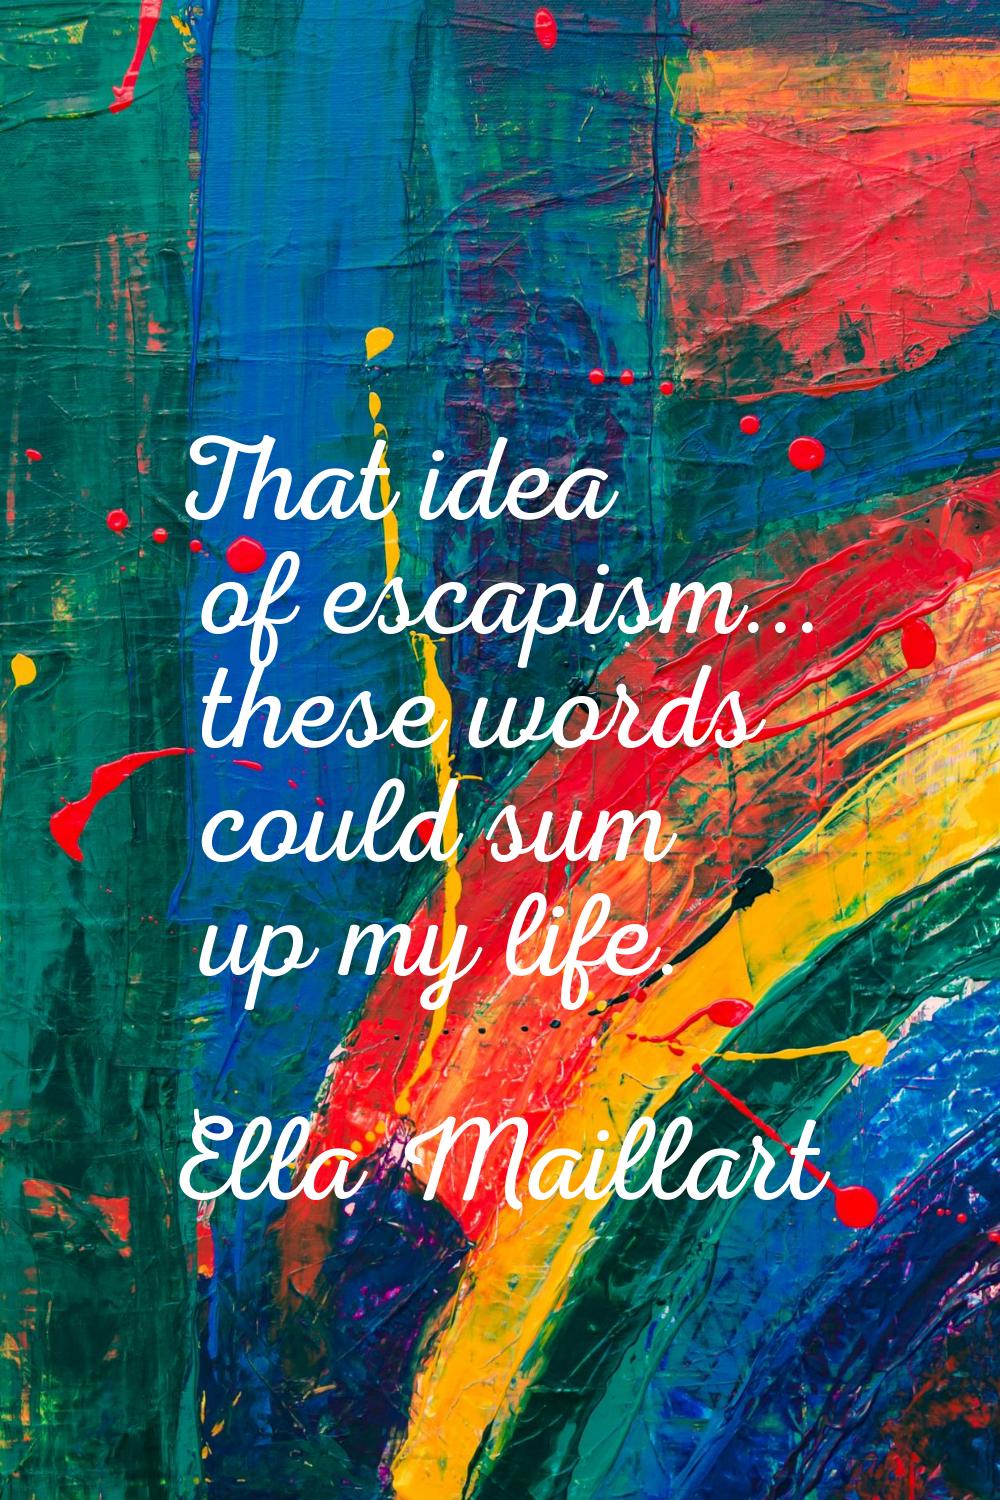 That idea of escapism... these words could sum up my life.